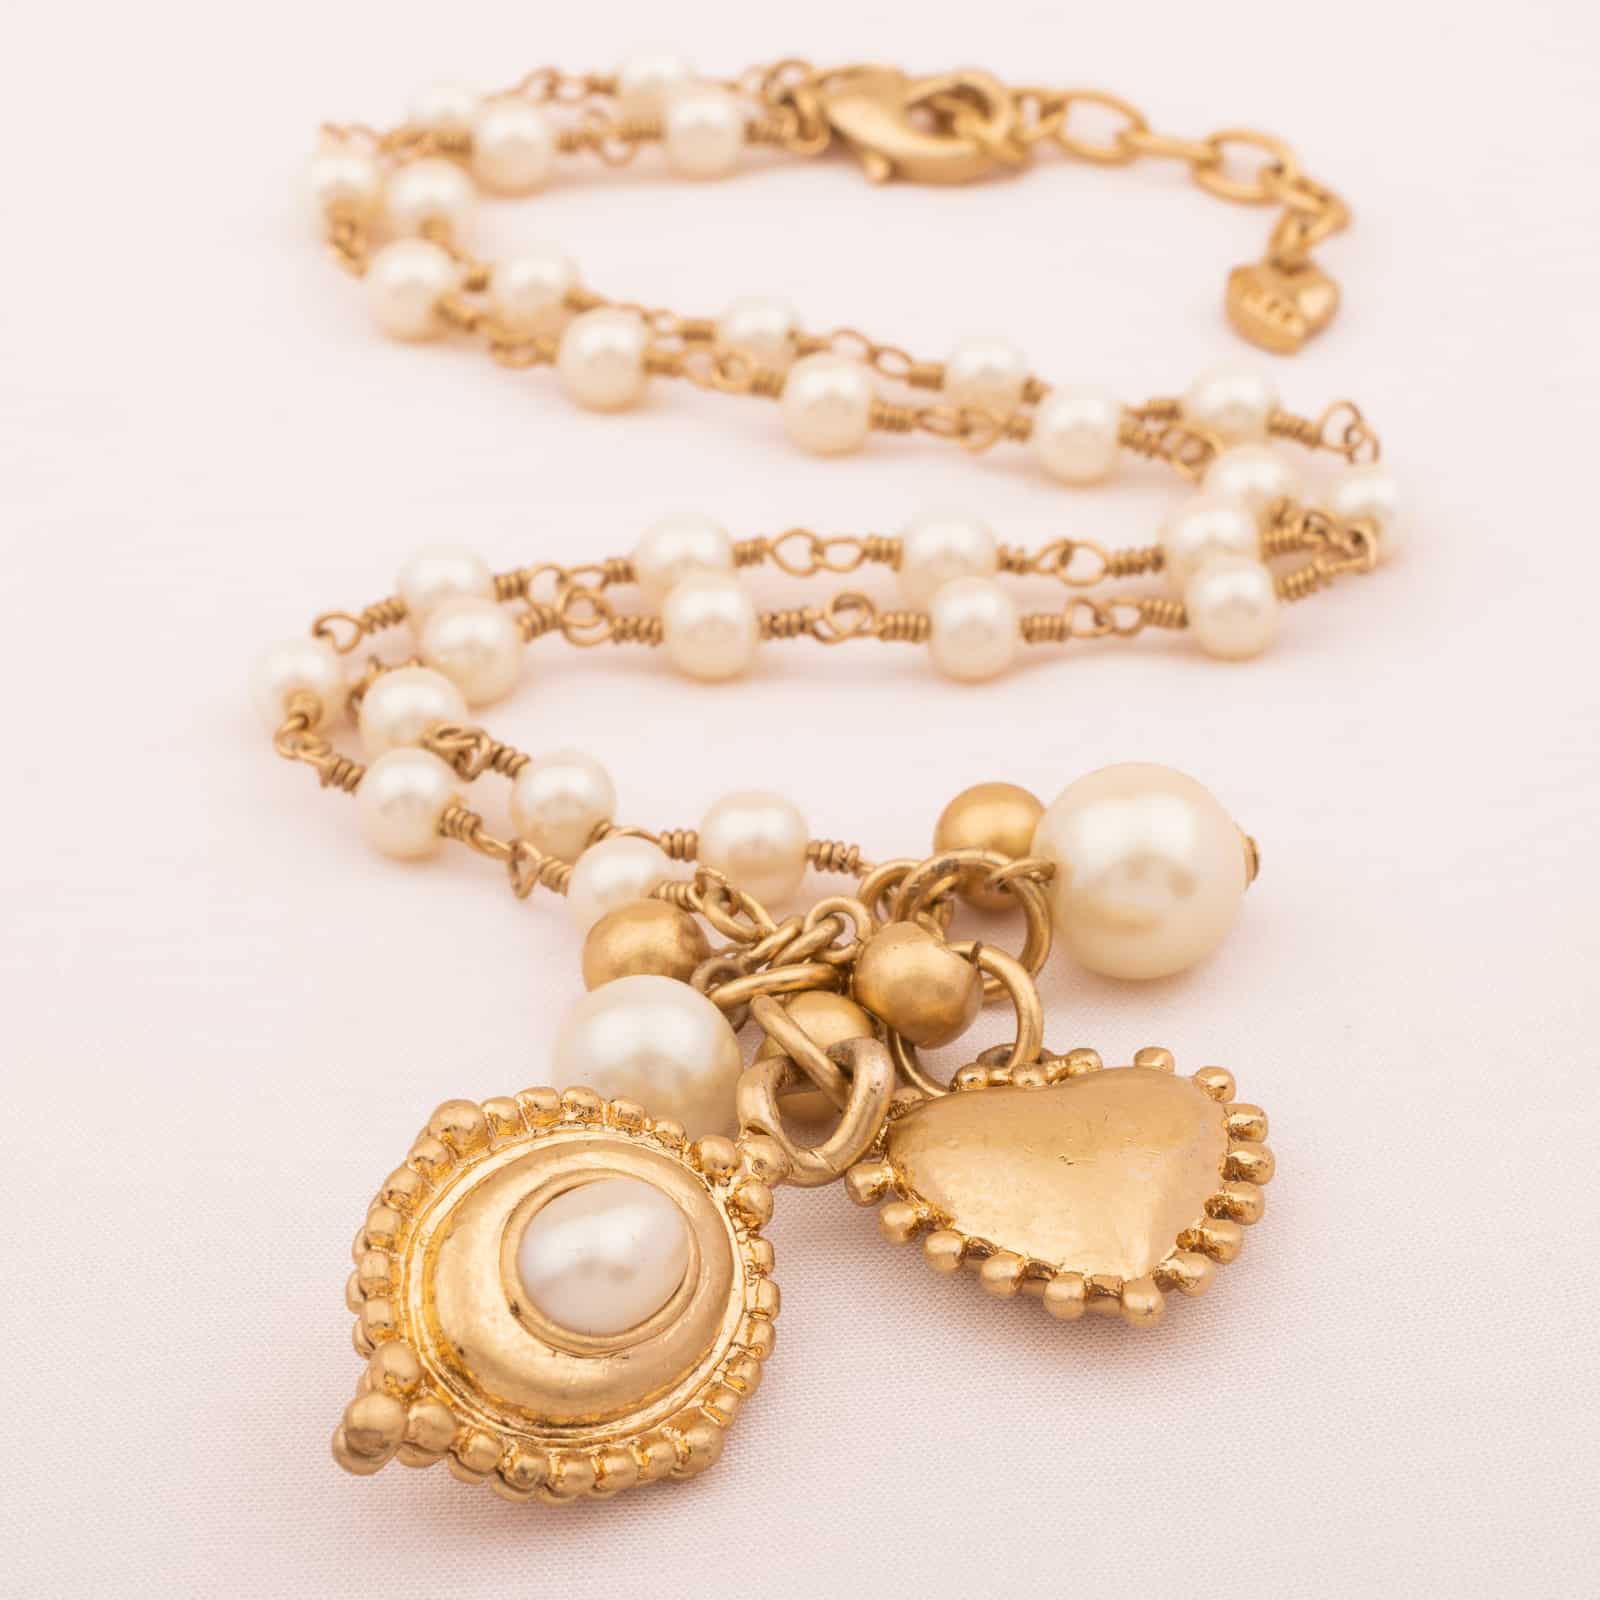 CAROLEE necklace with pearls and heart pendant – Find Vintage Beauty